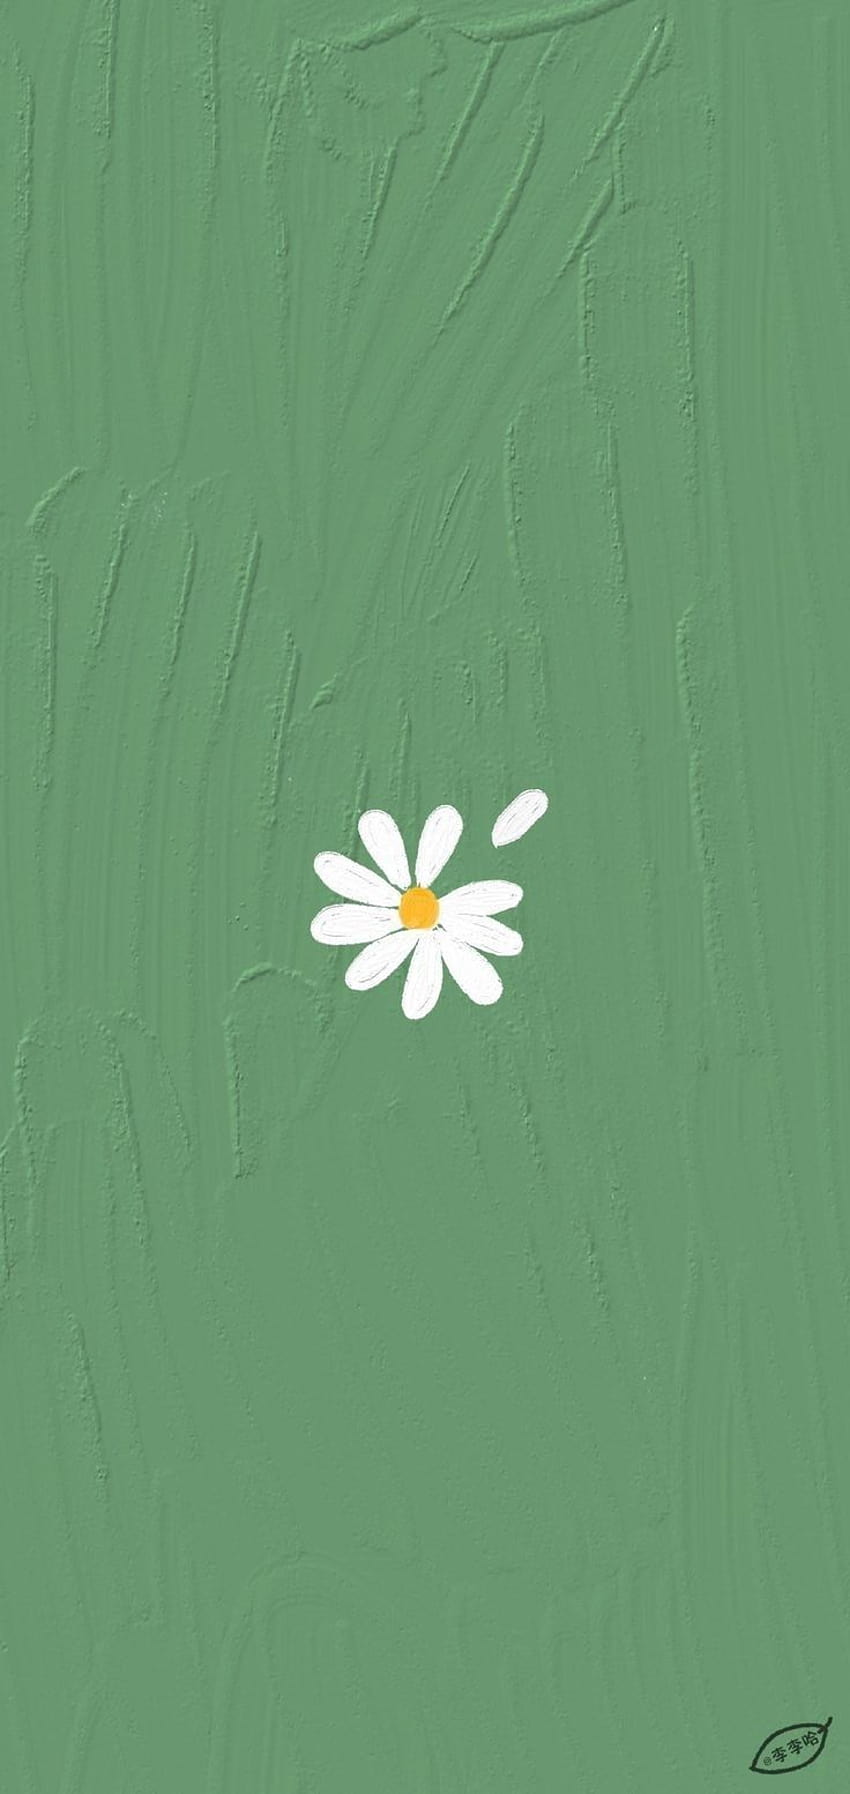 A painting of daisy on green background - Green, pastel green